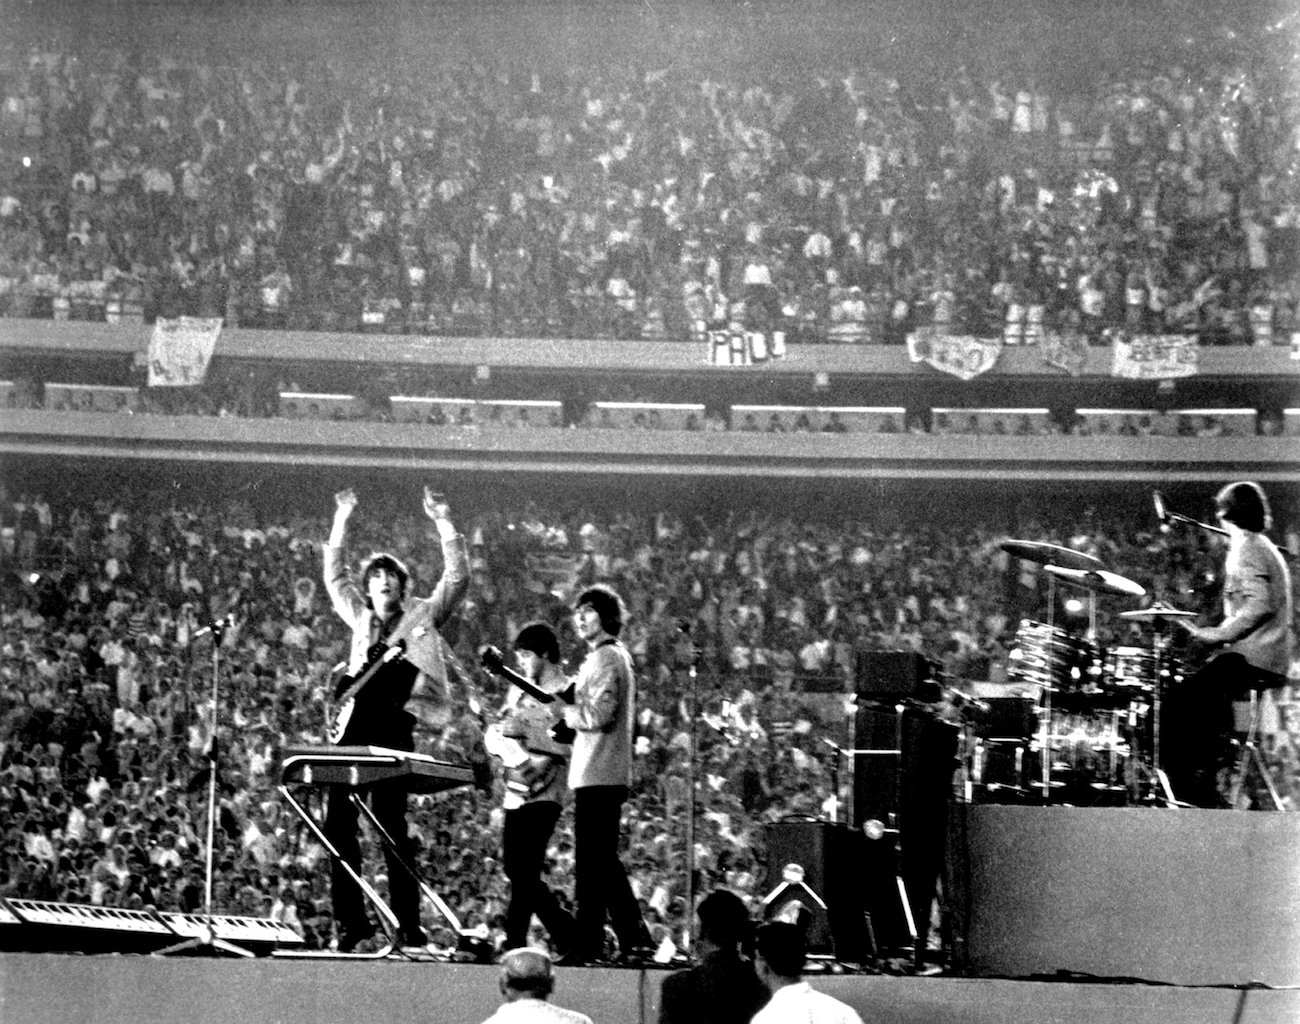 The Beatles' performance at Shea Stadium in 1965.